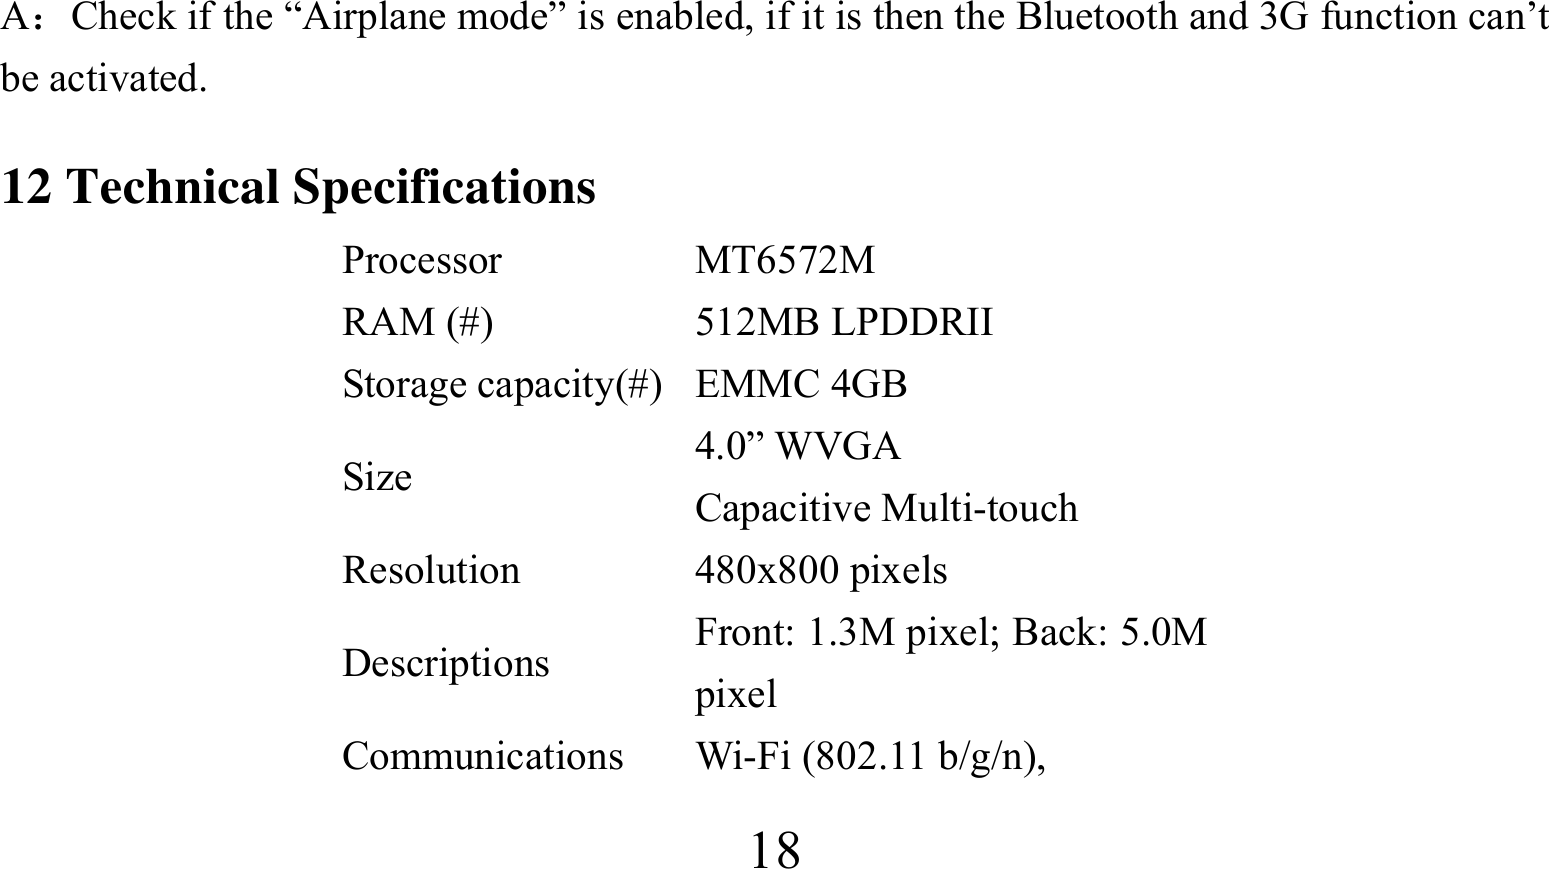  18A：Check if the “Airplane mode” is enabled, if it is then the Bluetooth and 3G function can’t be activated. 12 Technical Specifications Processor MT6572M RAM (#)  512MB LPDDRII Storage capacity(#) EMMC 4GB Size  4.0” WVGA   Capacitive Multi-touch Resolution 480x800 pixels Descriptions  Front: 1.3M pixel; Back: 5.0M pixel Communications Wi-Fi (802.11 b/g/n),  